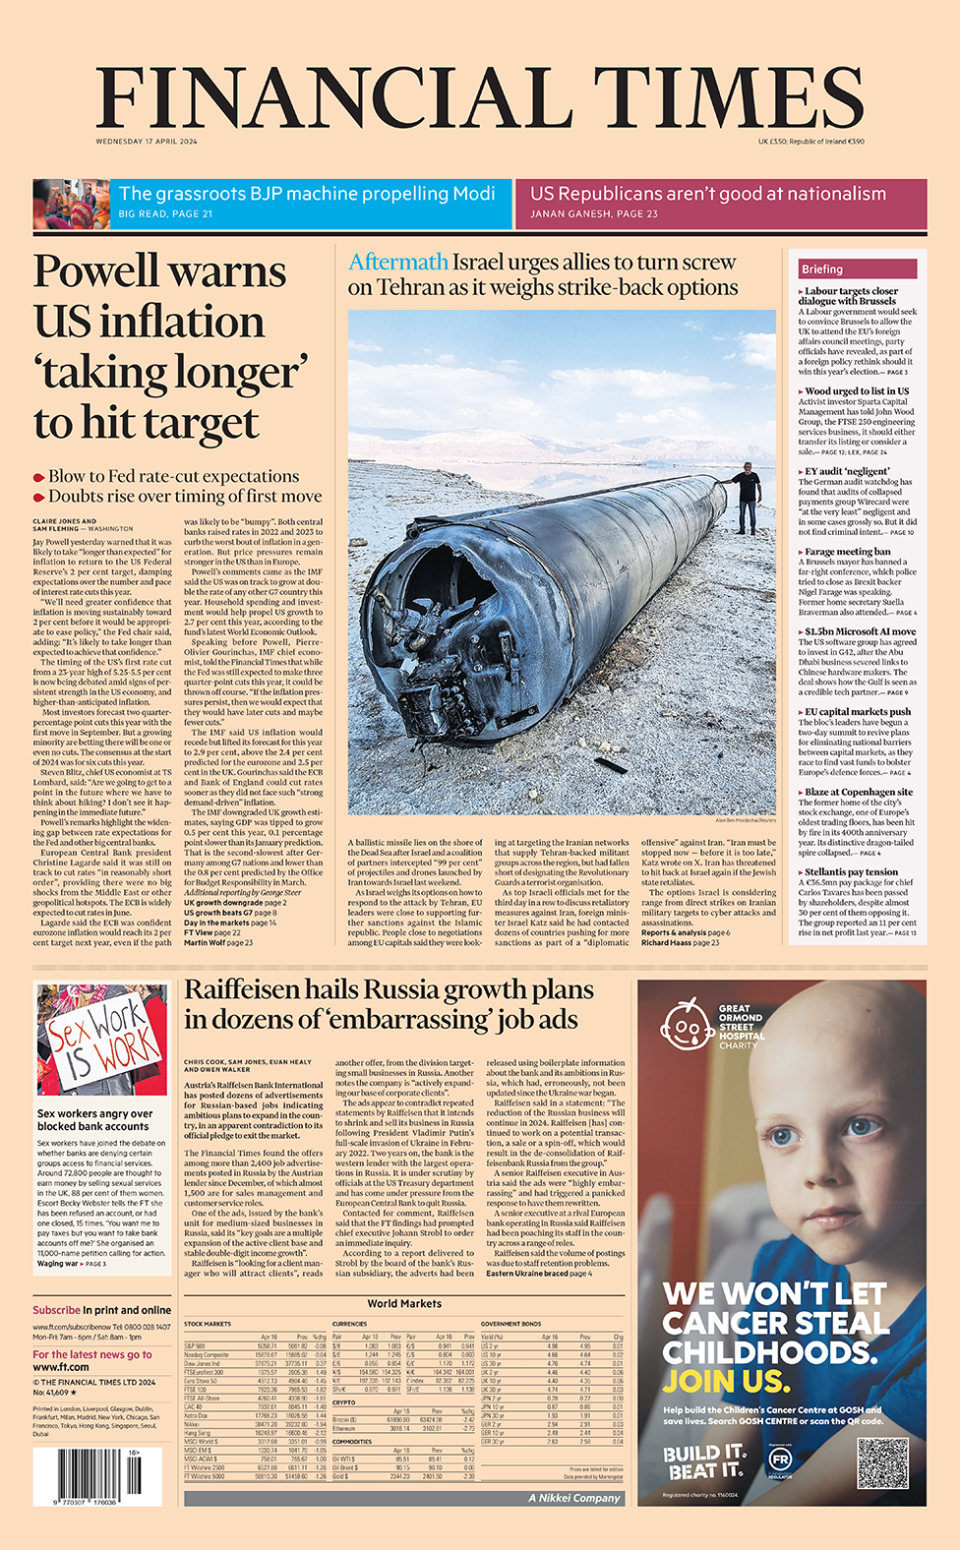 The headline in the Financial Times reads: "Powell warns US inflation 'taking longer' to hit target".